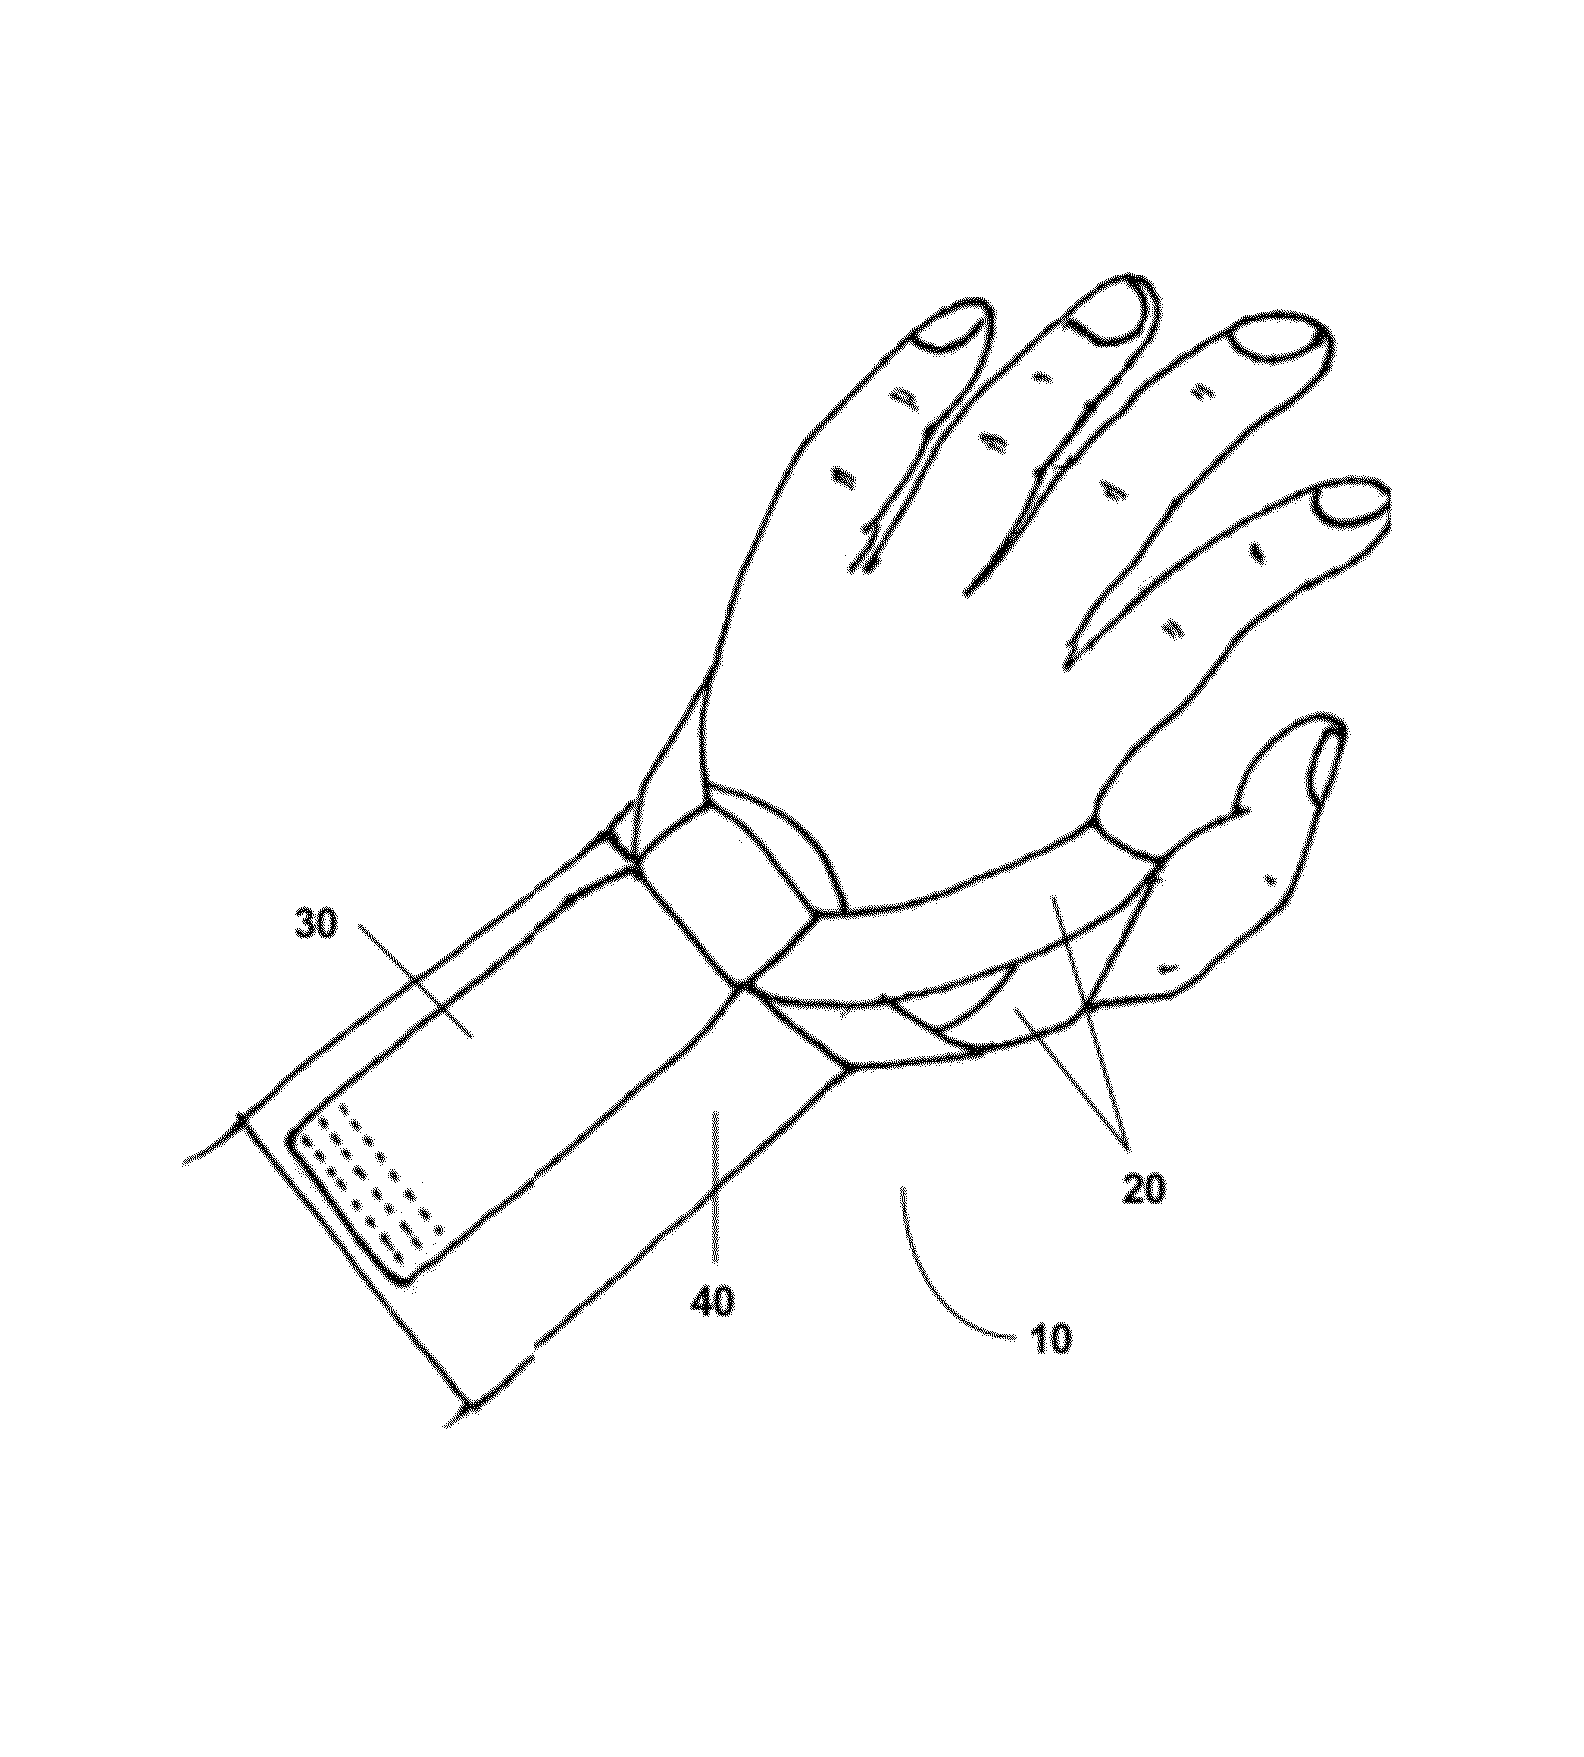 Modular upper extremity support system